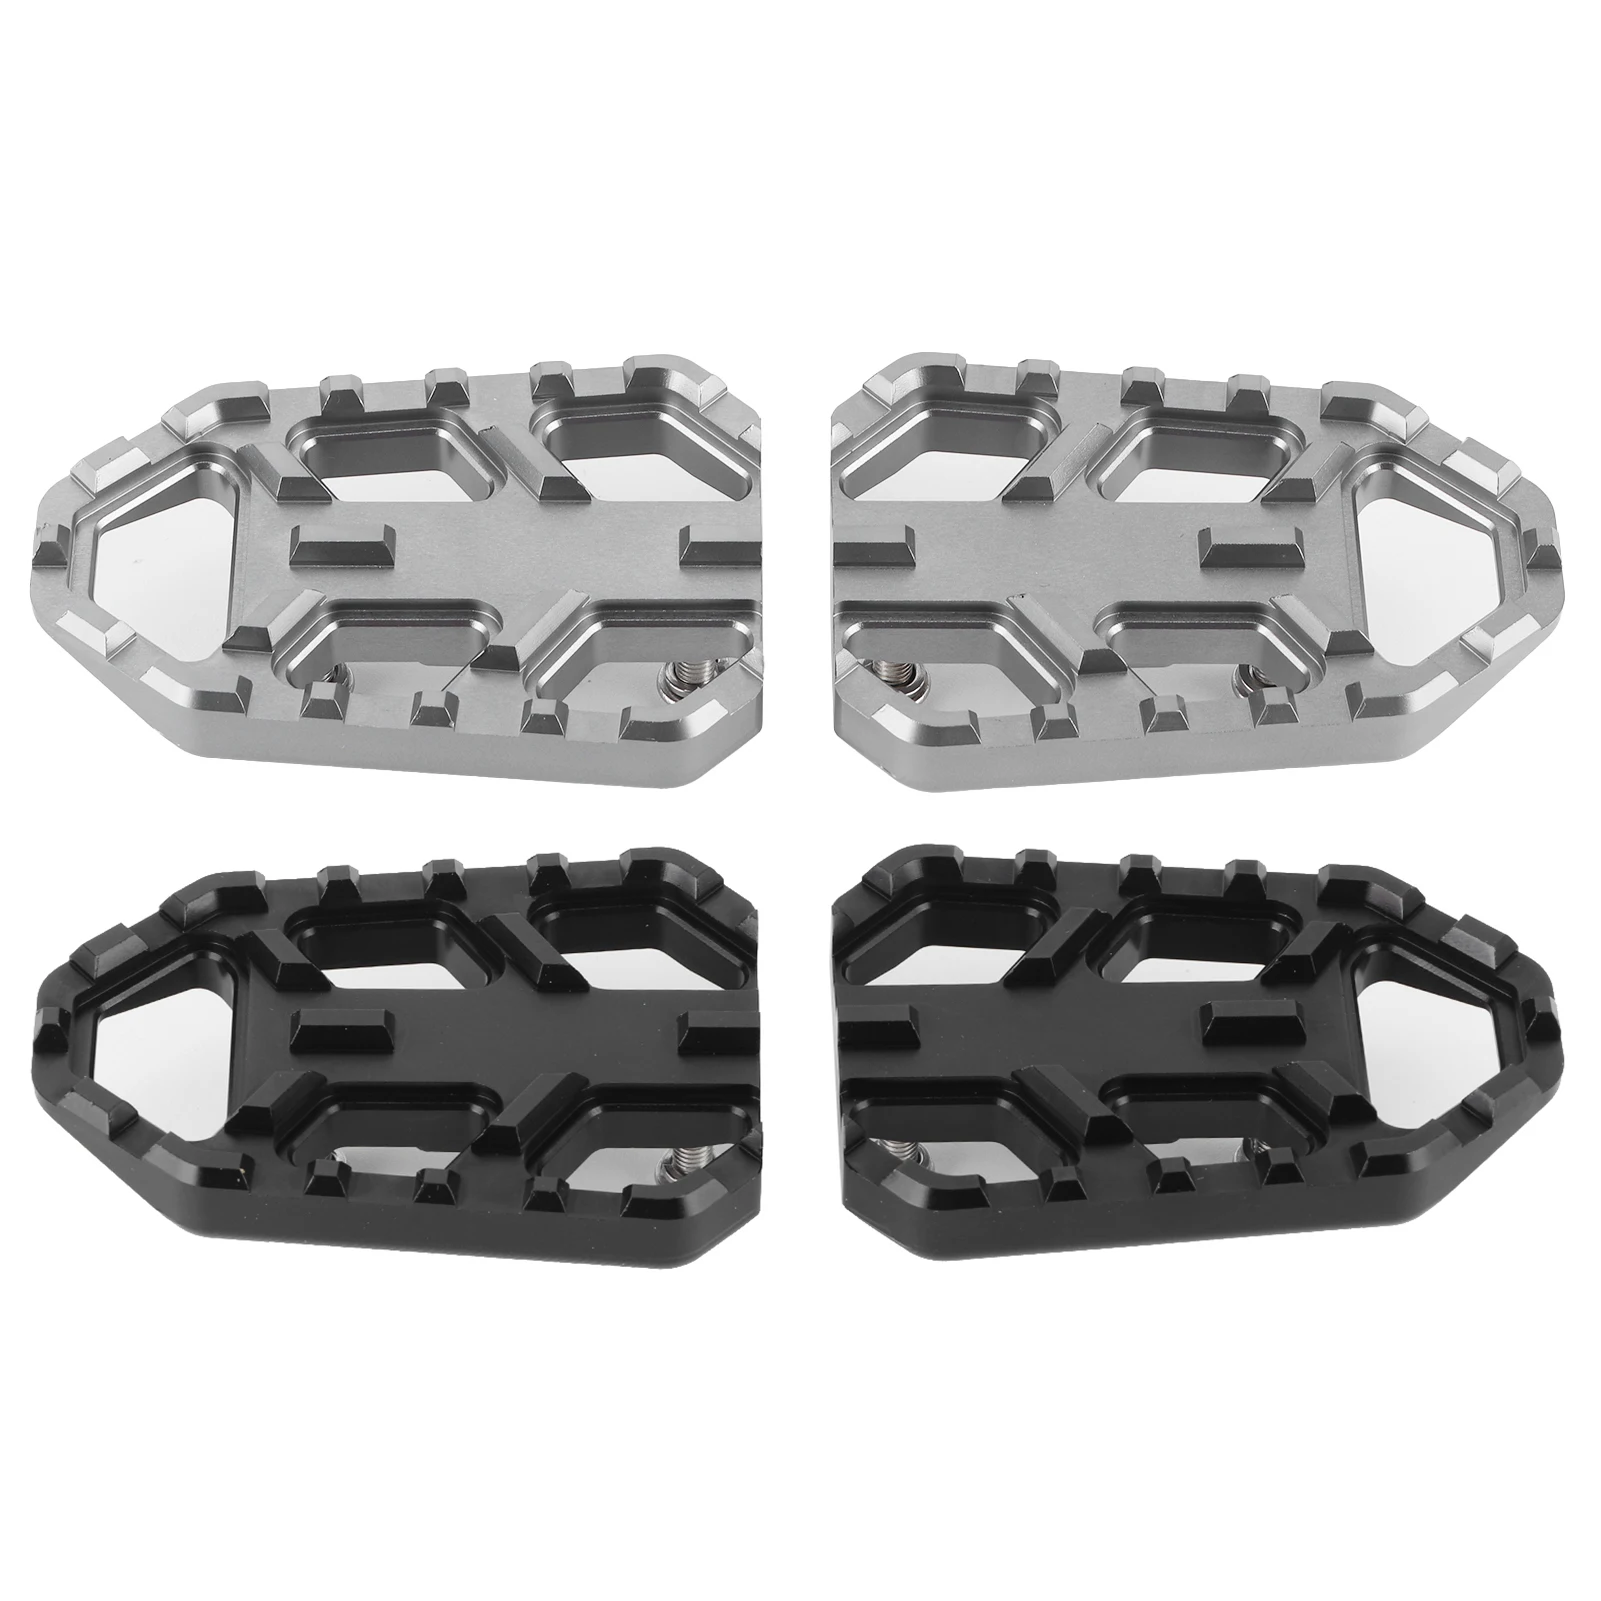 Cycling Foot Rest Motorcycle Wide Footrest CNC Aluminum Alloy Pedals Fit... - $24.78